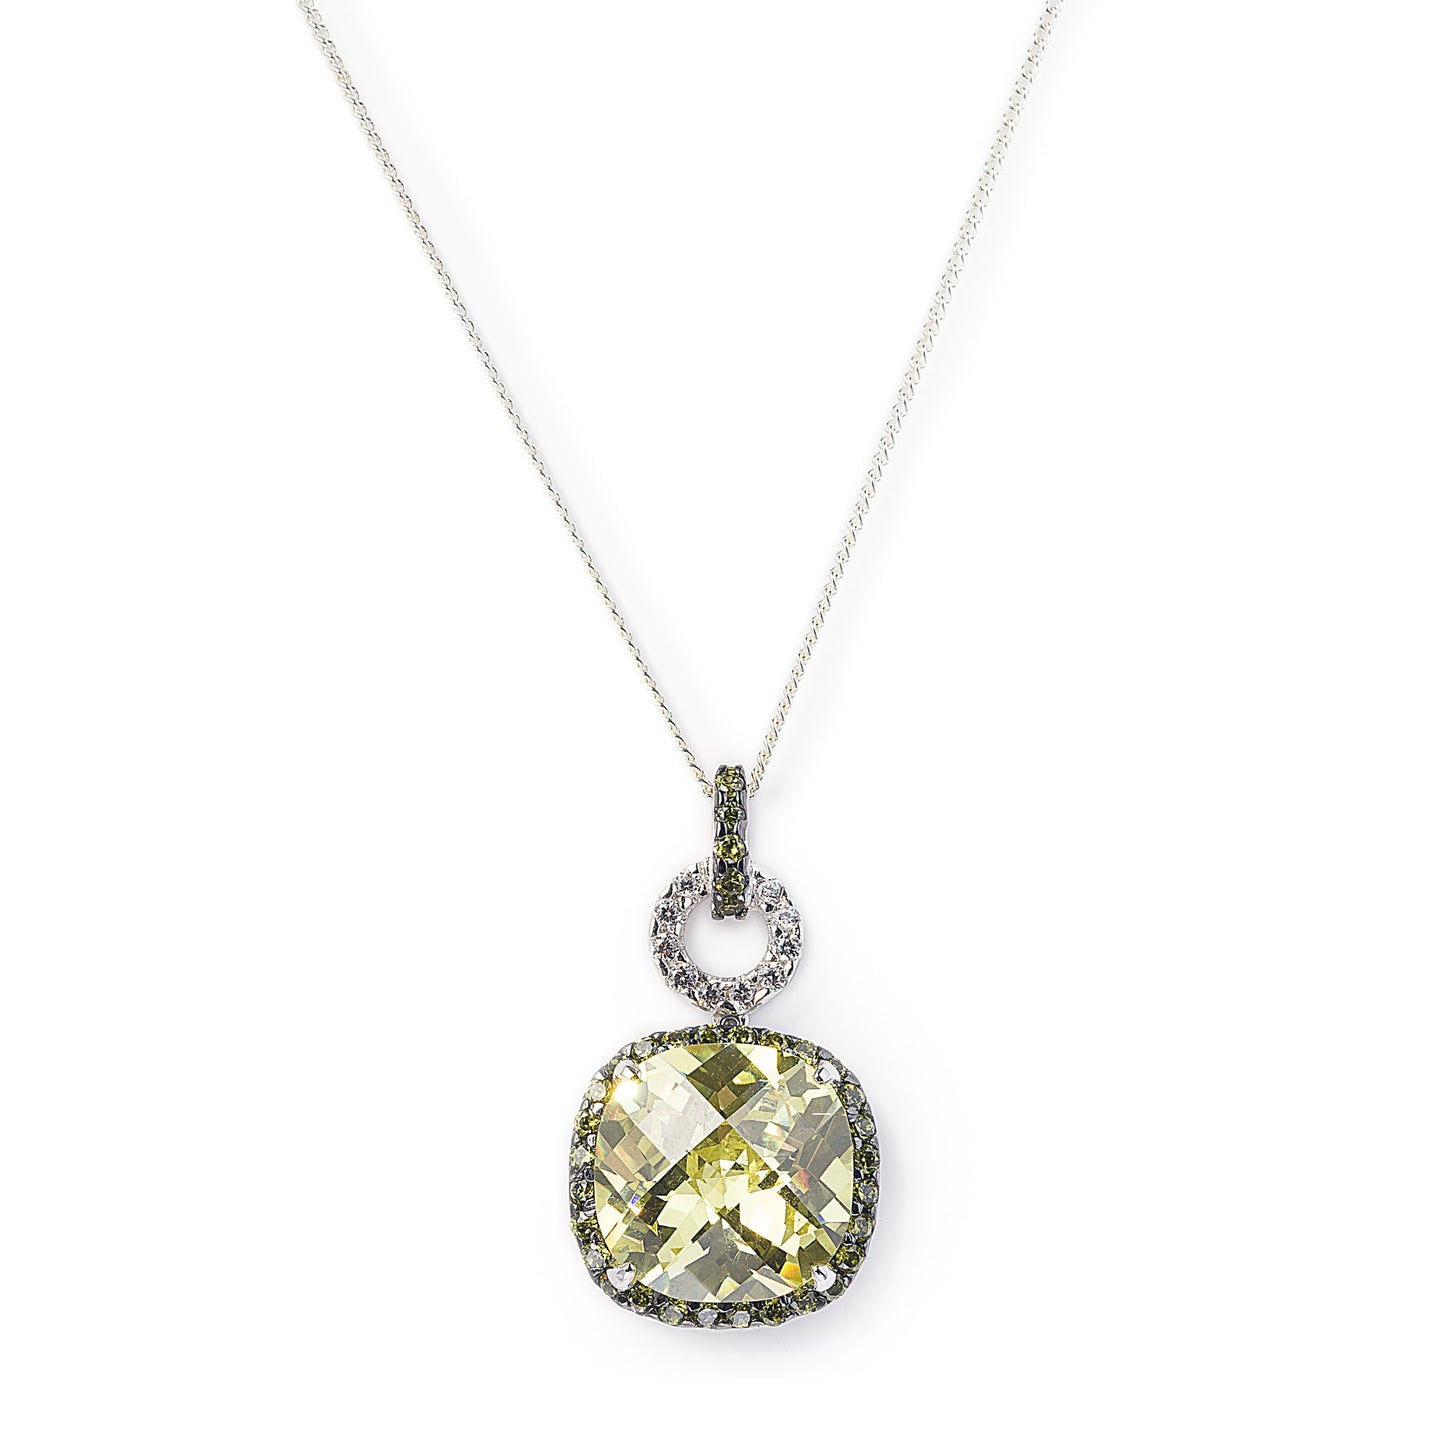 Antique Style 925 Sterling Silver necklace featuring a stunning Green Peridot stone surrounded by dainty black Cubic Zirconia Stones.